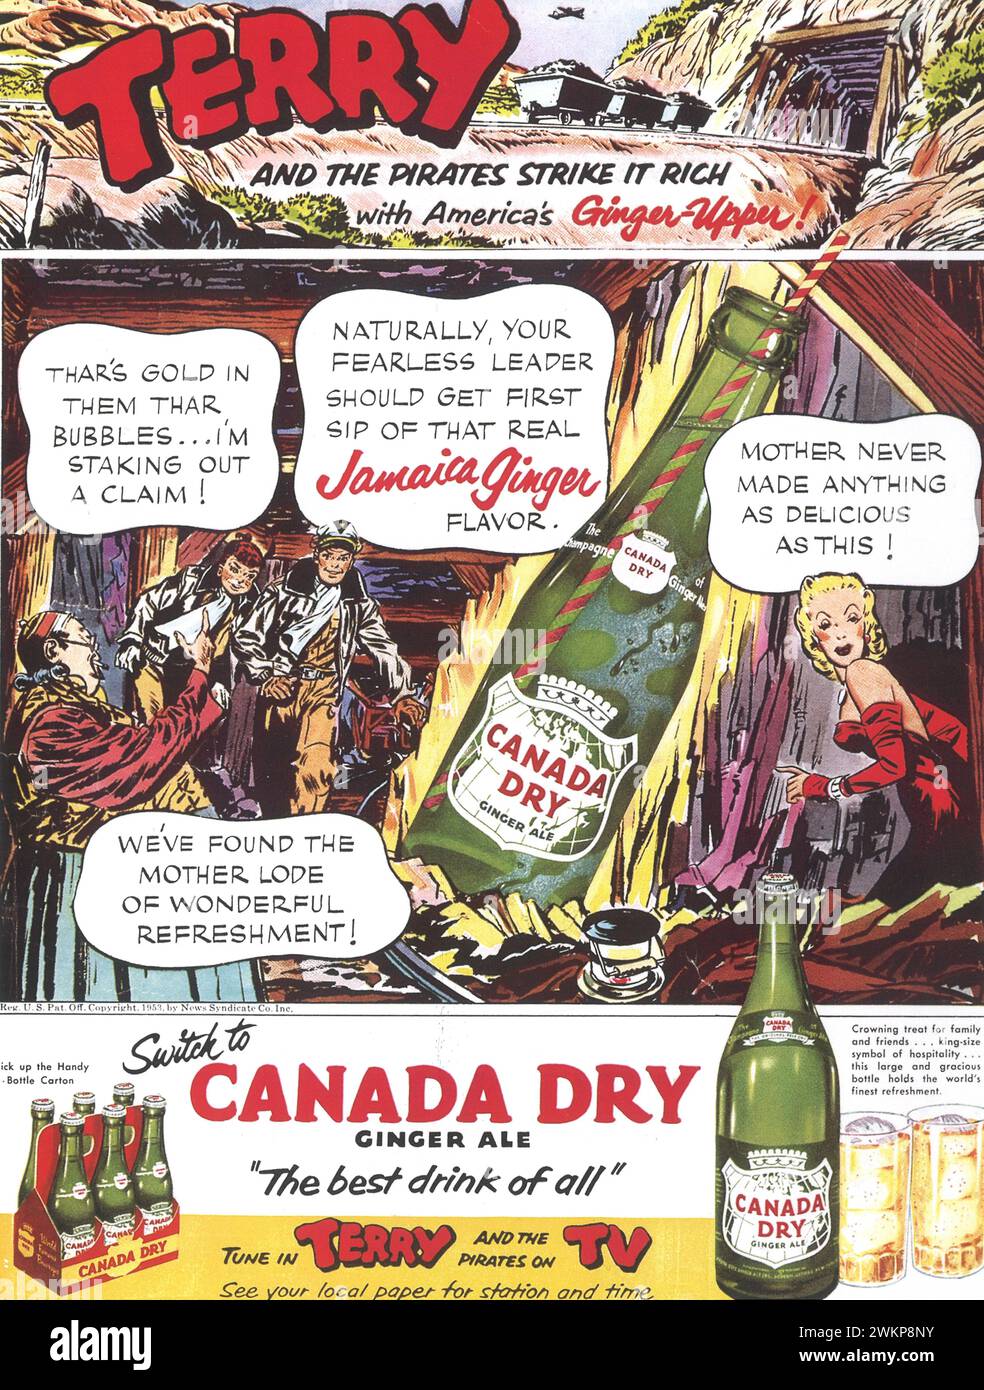 1953 Canada Dry ginger ale print ad. Terry and the pirates strike it rich with America's ginger-upper! Stock Photo